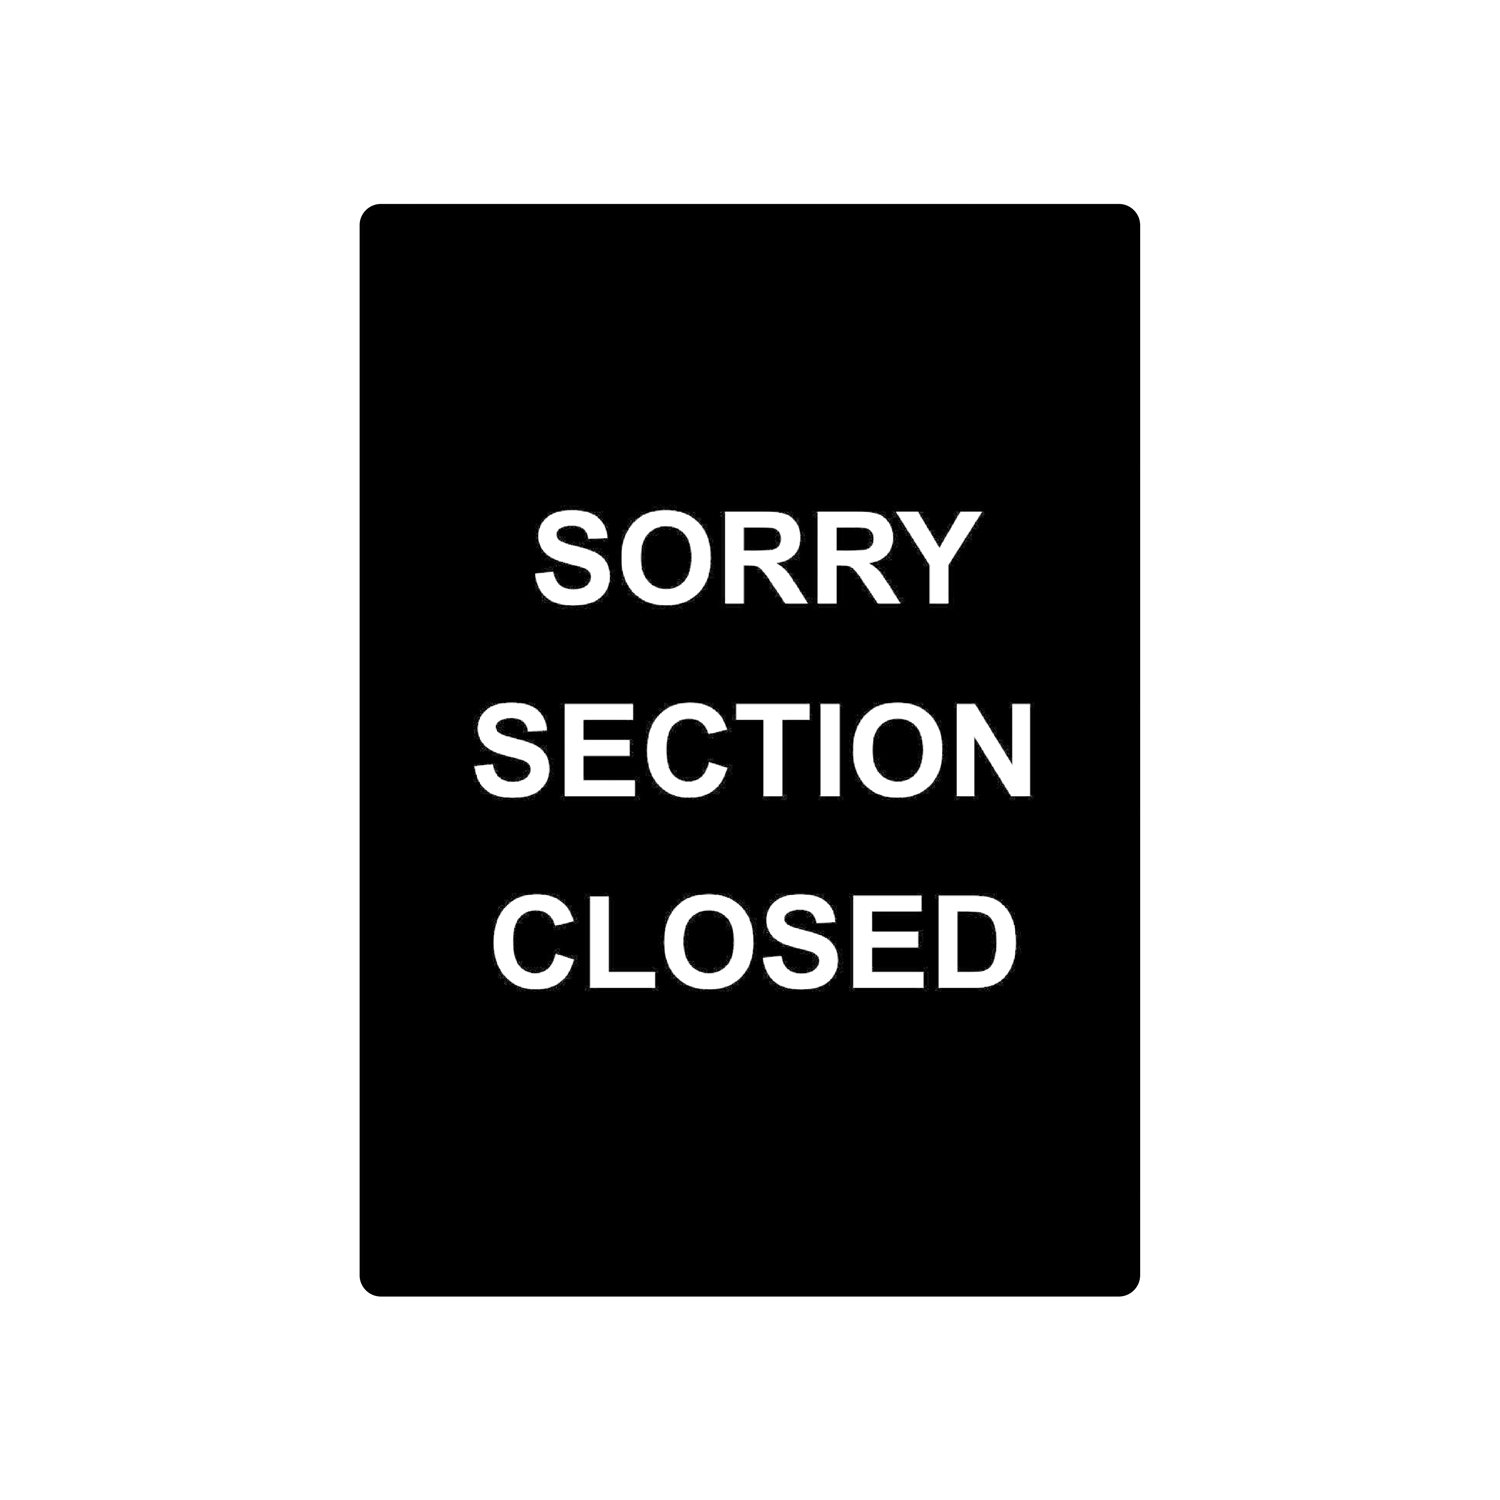 CAC China CCSN-CS4 Sign Stanchion SORRY SECTION CLOSED